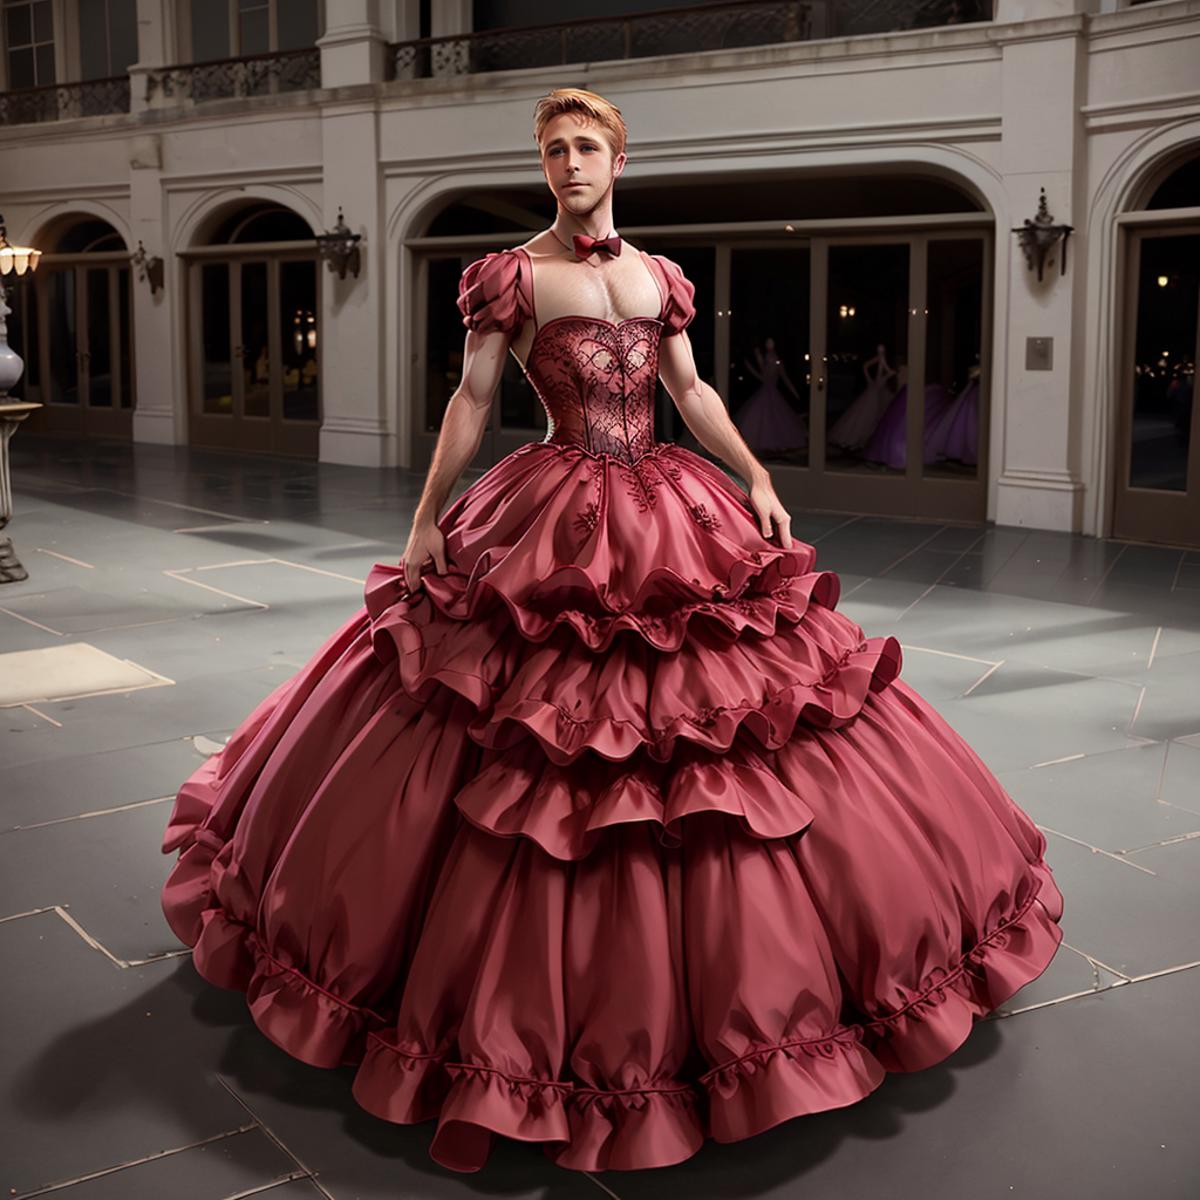 Ball gowns image by Jabberwocky207